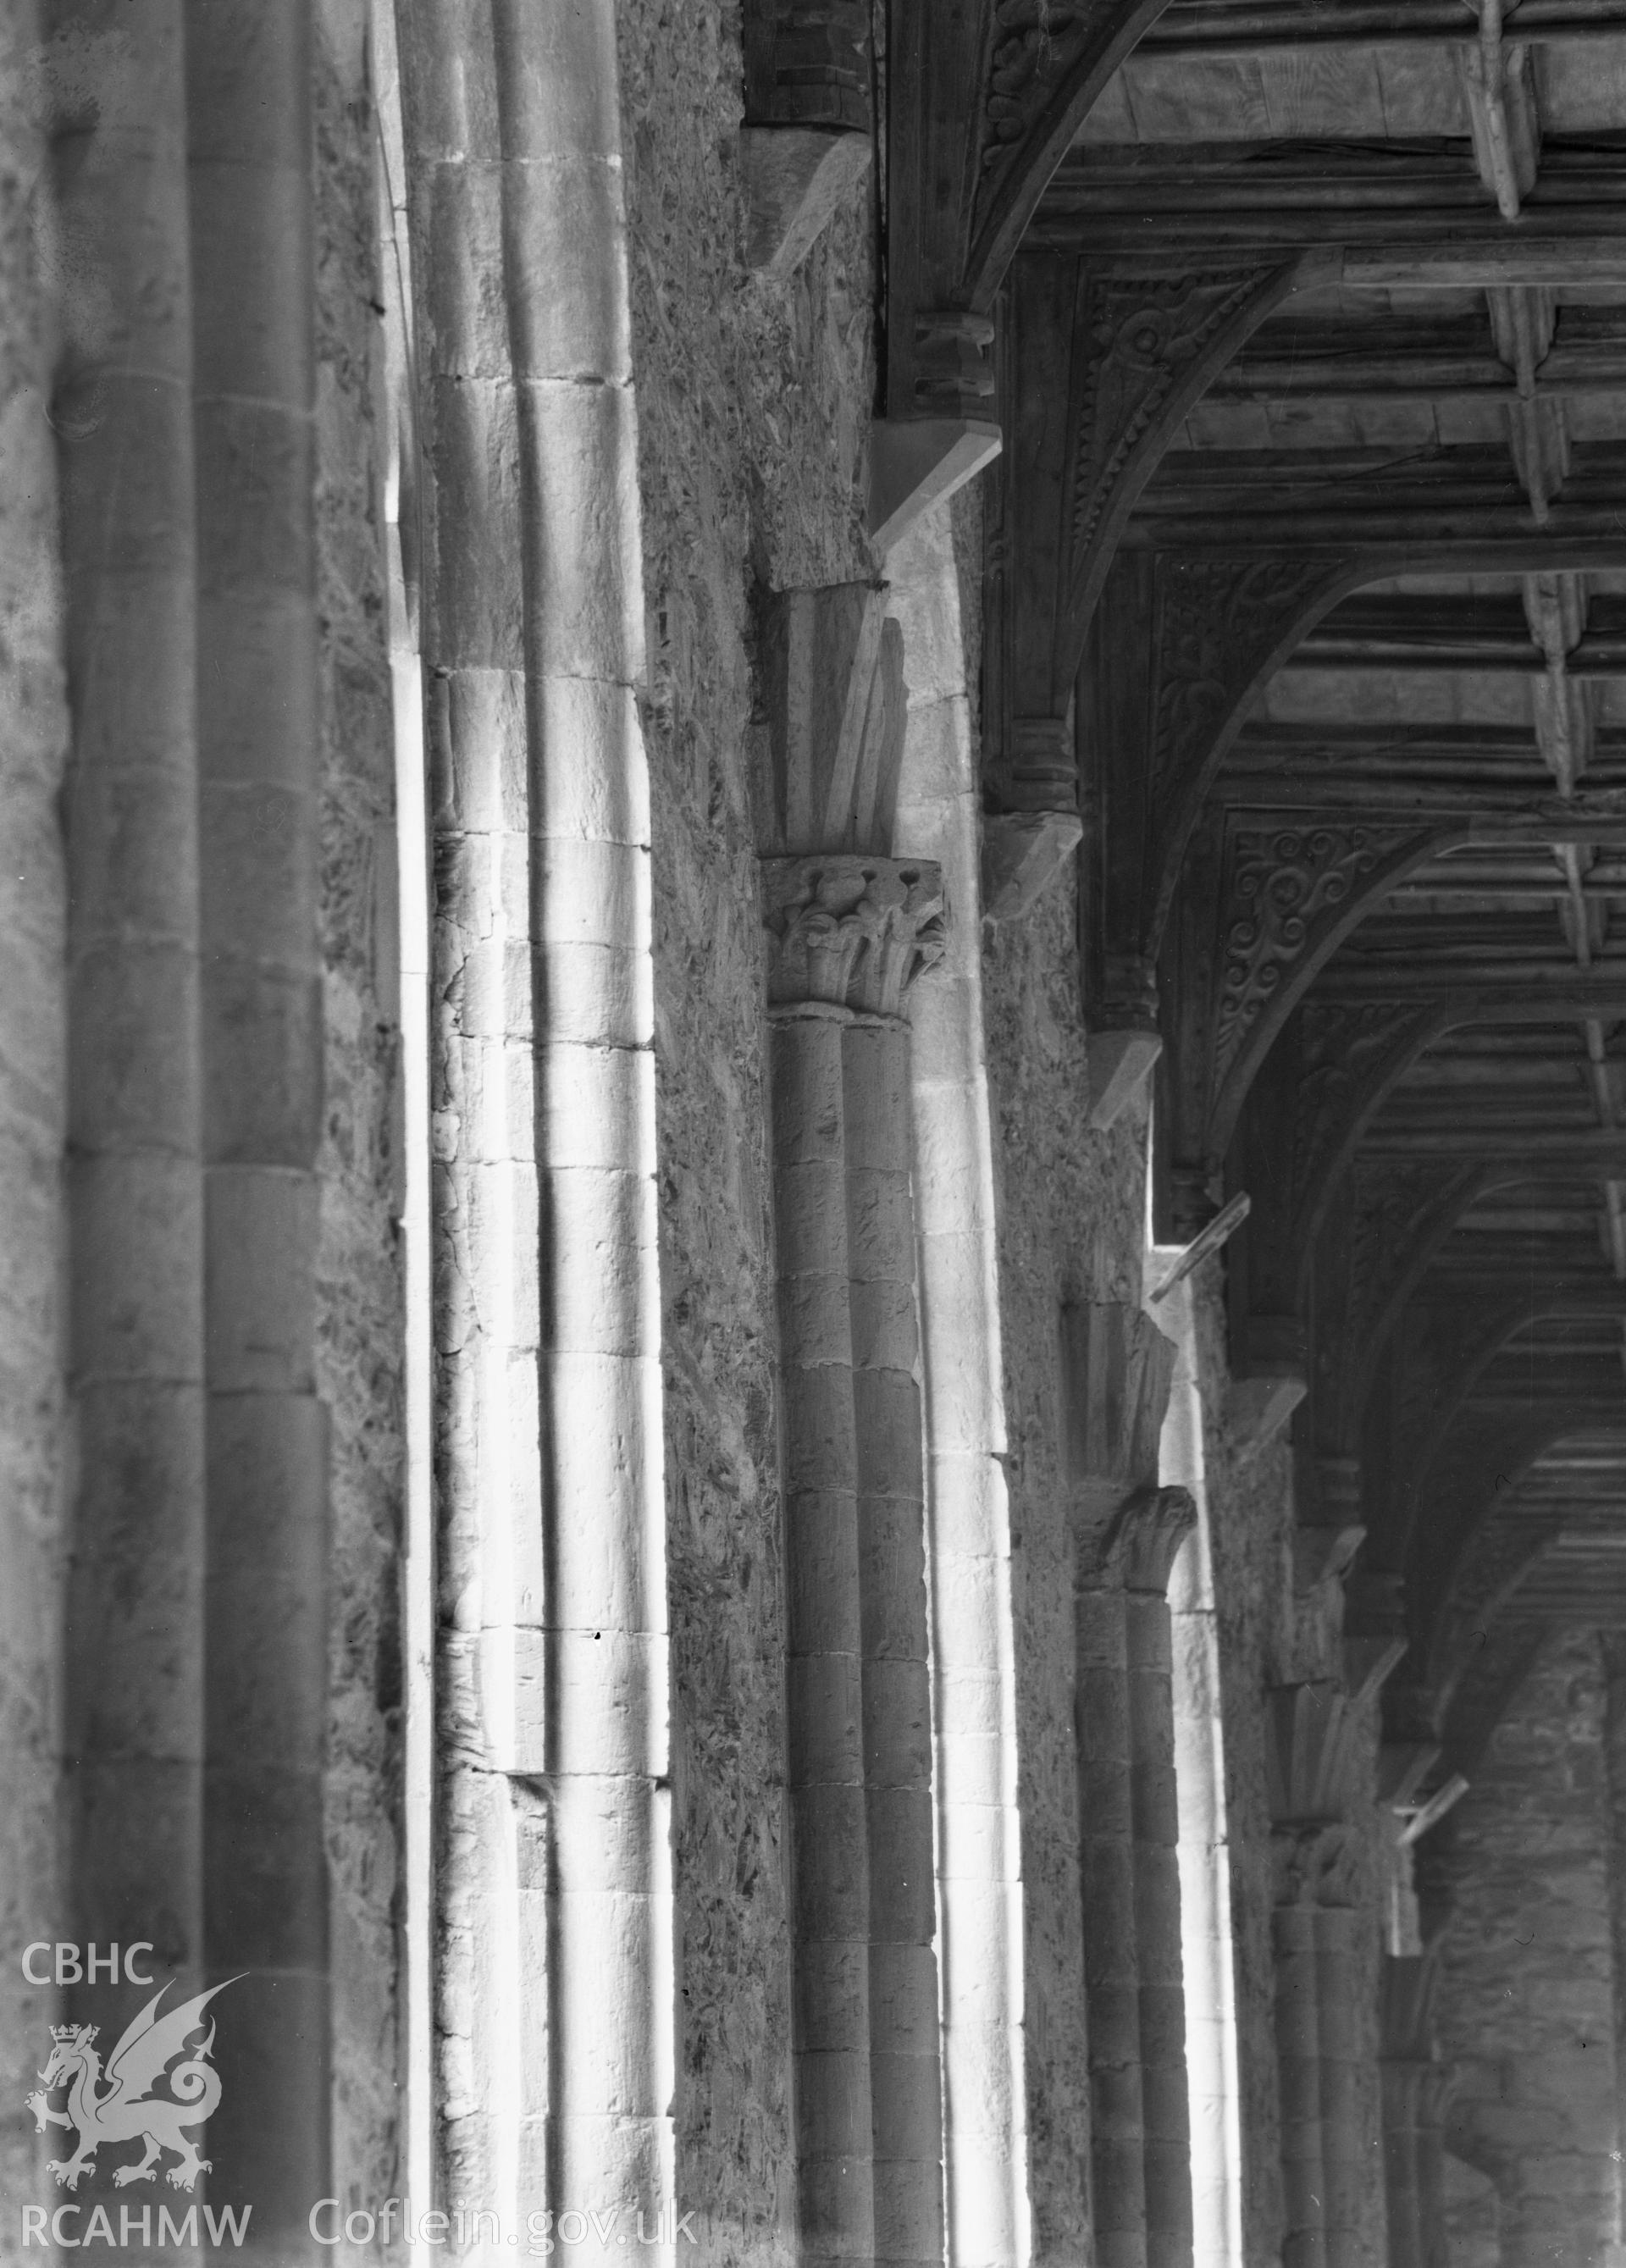 Digital copy of a black and white nitrate negative showing interior view, window columns at St. David's Cathedral, taken by E.W. Lovegrove, July 1936.